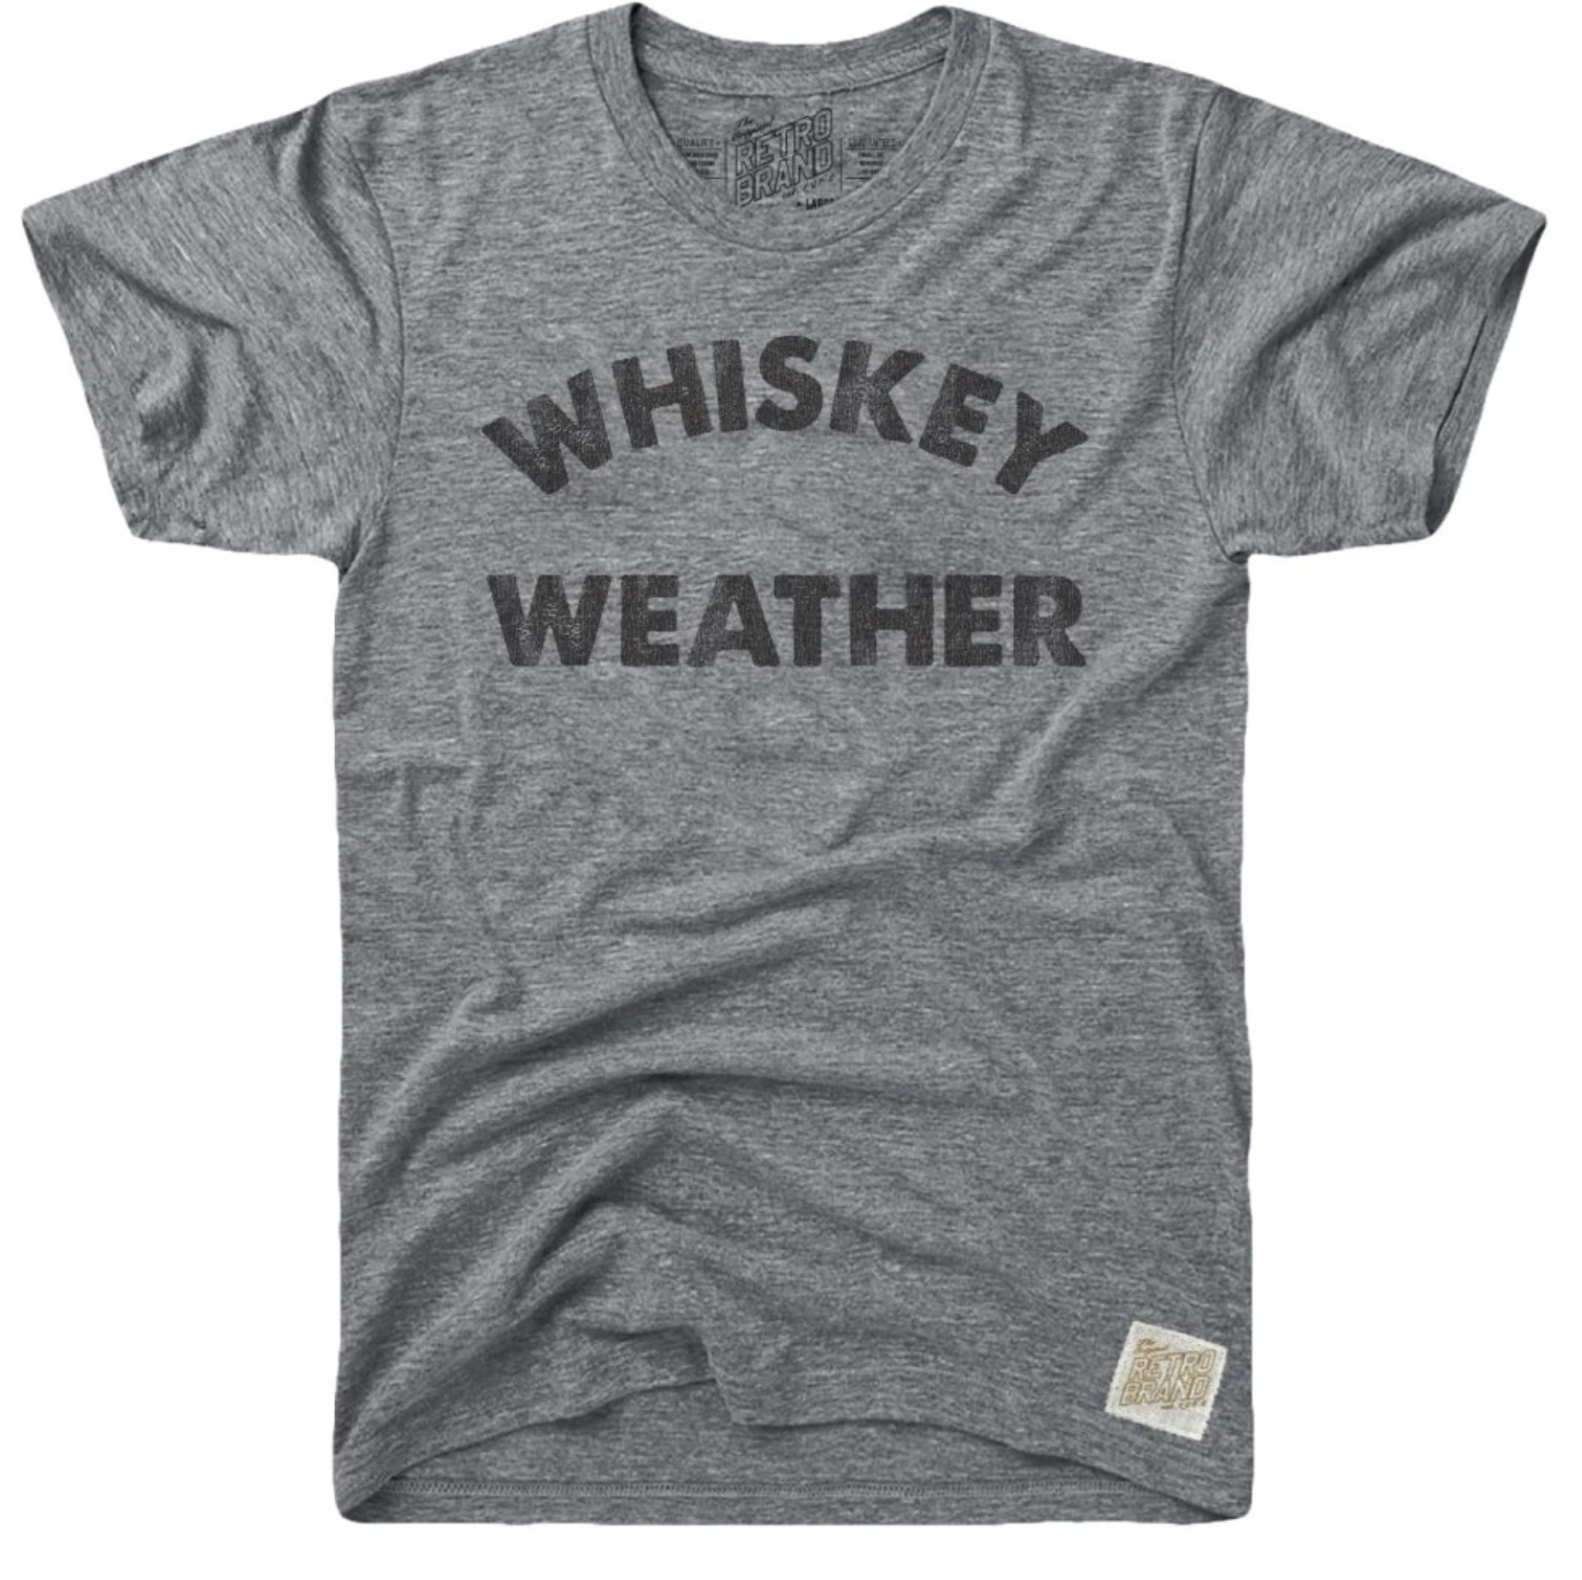 Whiskey Weather in black type on our streaky gray tri-blend short sleeve tee